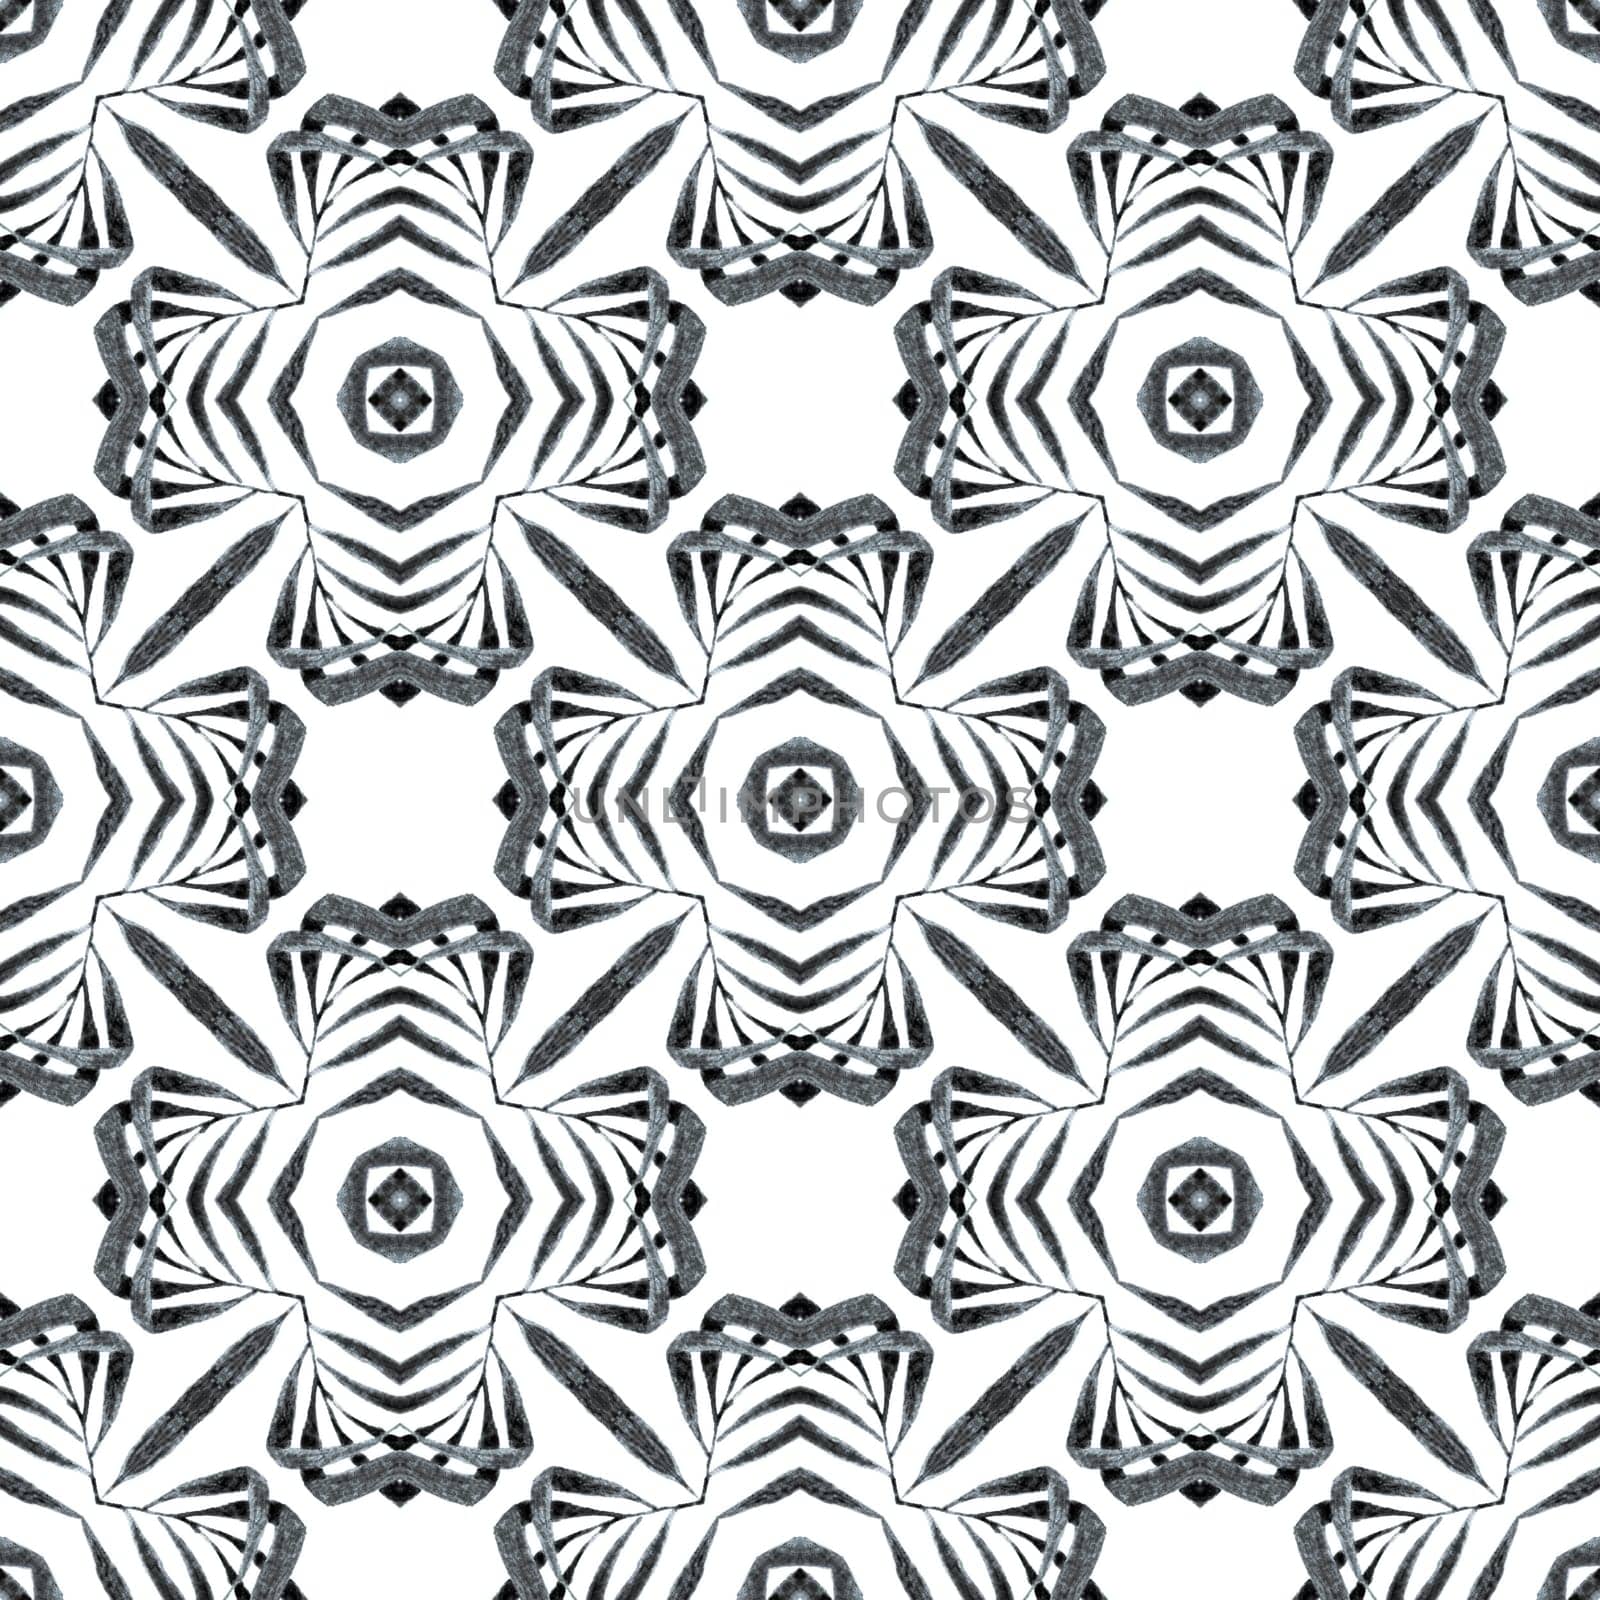 Striped hand drawn design. Black and white awesome boho chic summer design. Textile ready indelible print, swimwear fabric, wallpaper, wrapping. Repeating striped hand drawn border.